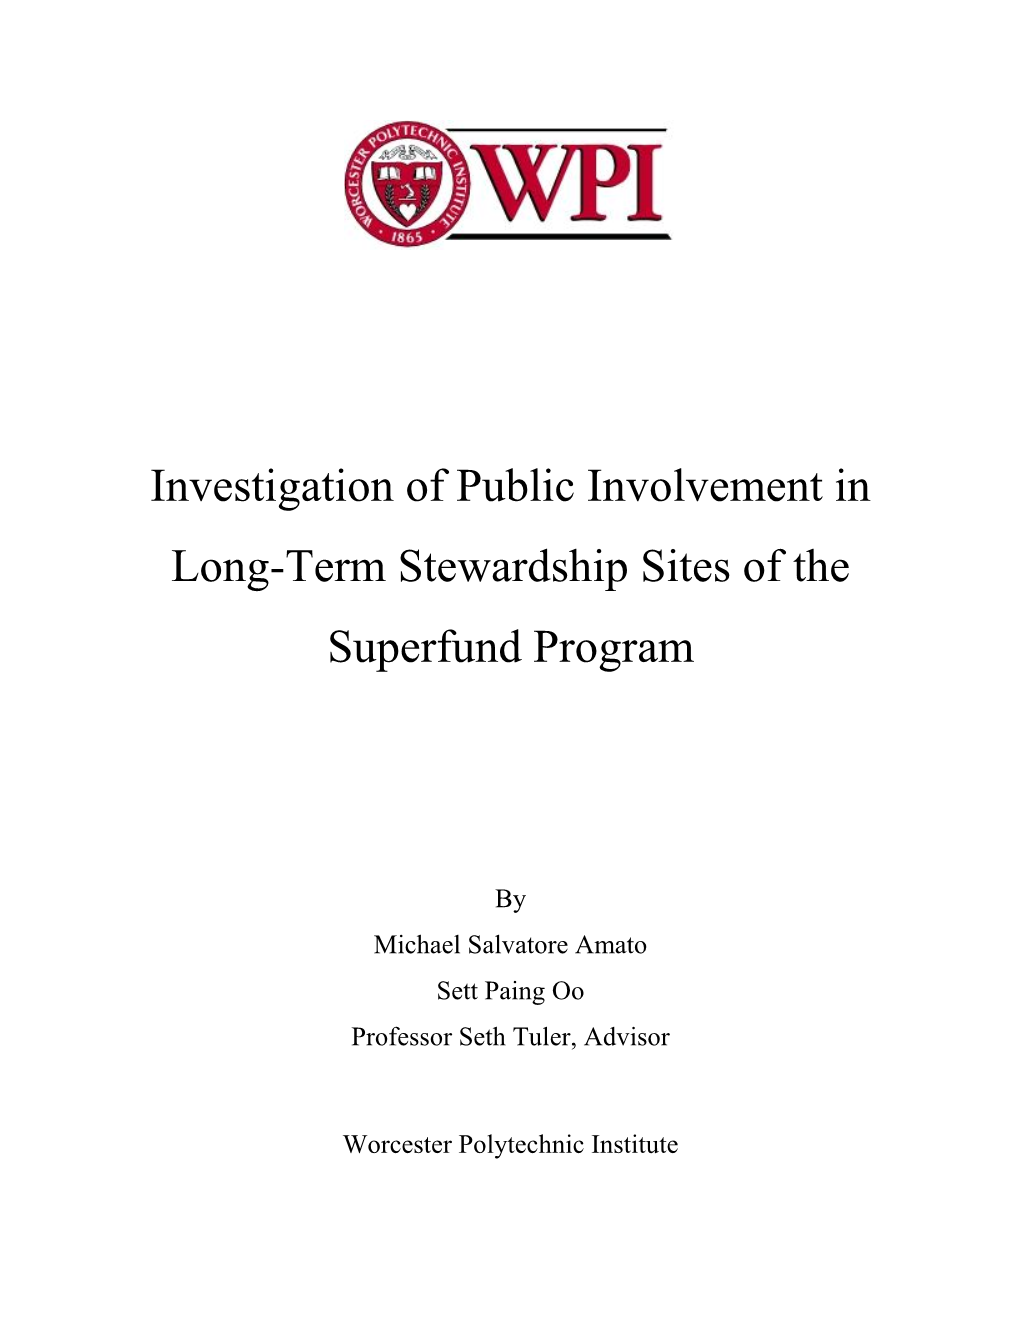 Investigation of Public Involvement in Long-Term Stewardship Sites of the Superfund Program